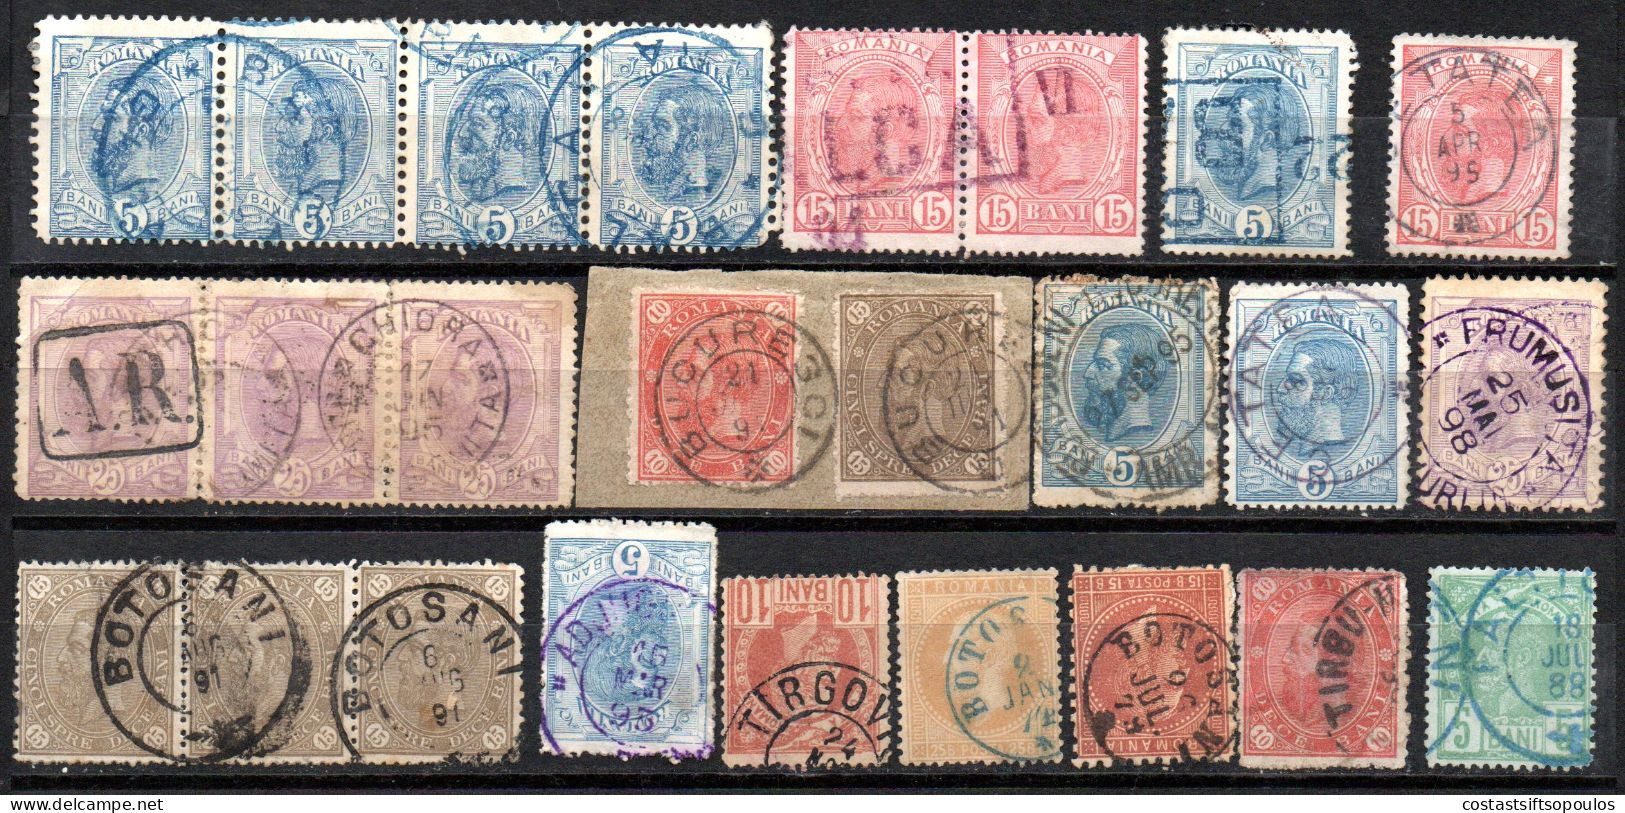 2670. ROMANIA CLASSIC STAMPS LOT, SOME INTERESTING POSTMARKS,FEW LIGHT FAULTS. - Used Stamps